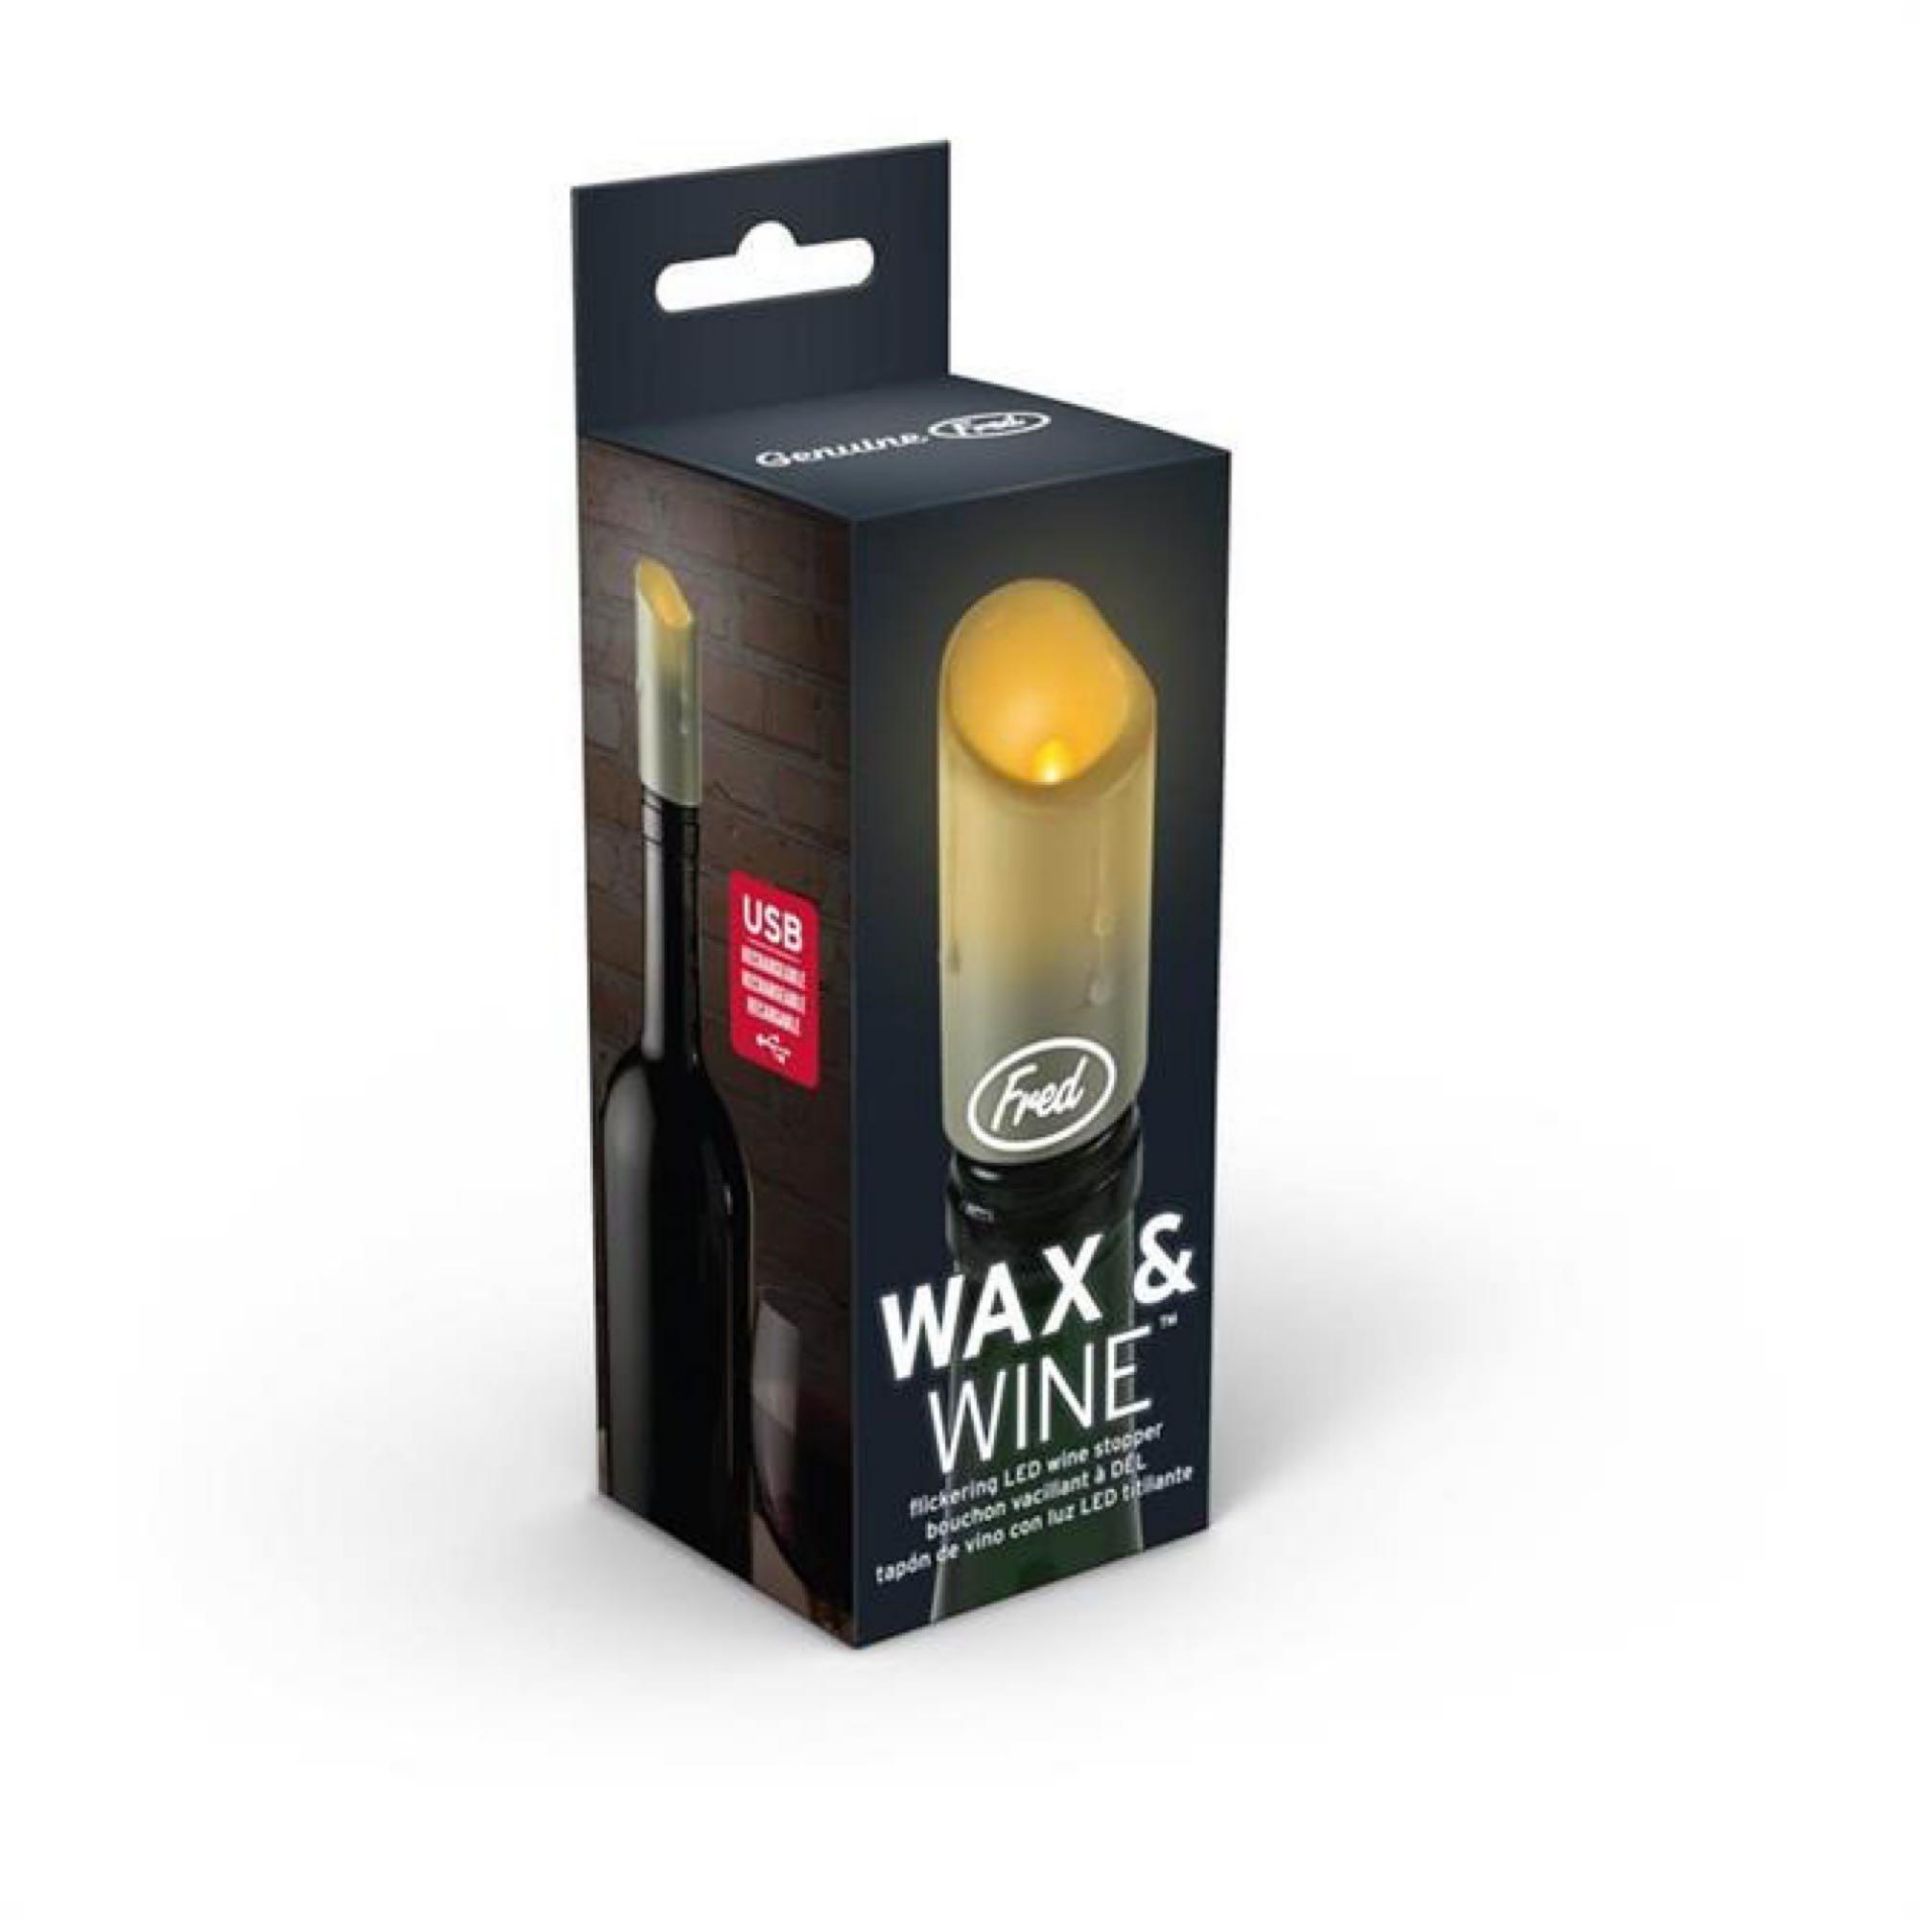 (Jb) RRP £240 Lot To Contain 48 Brand New Boxed High End Department Store Fred Wax And Wine Flickeri